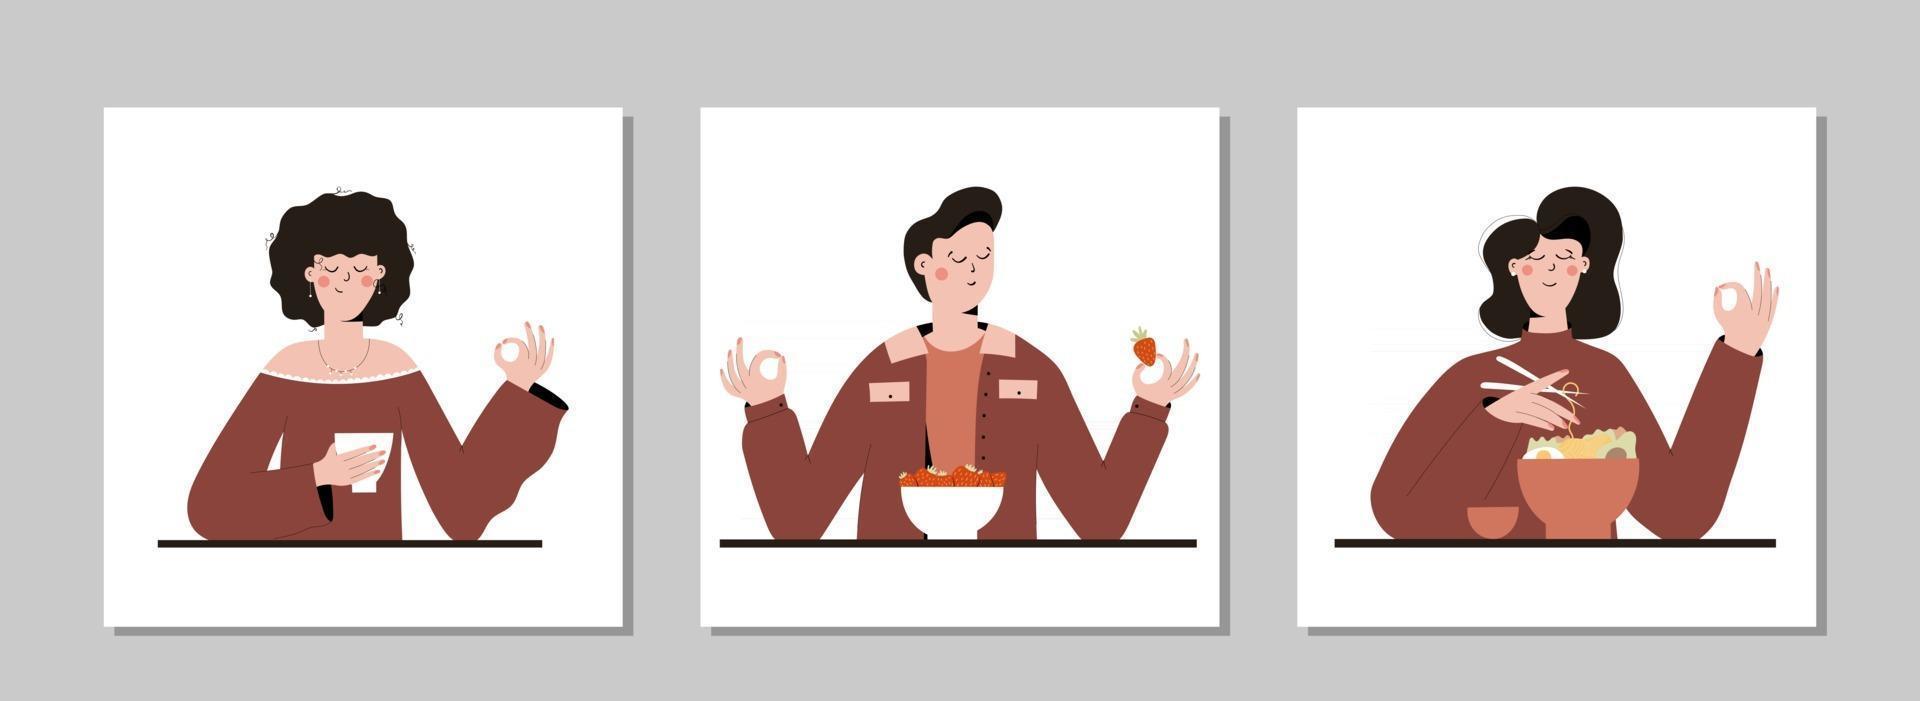 Mindful eating people vector